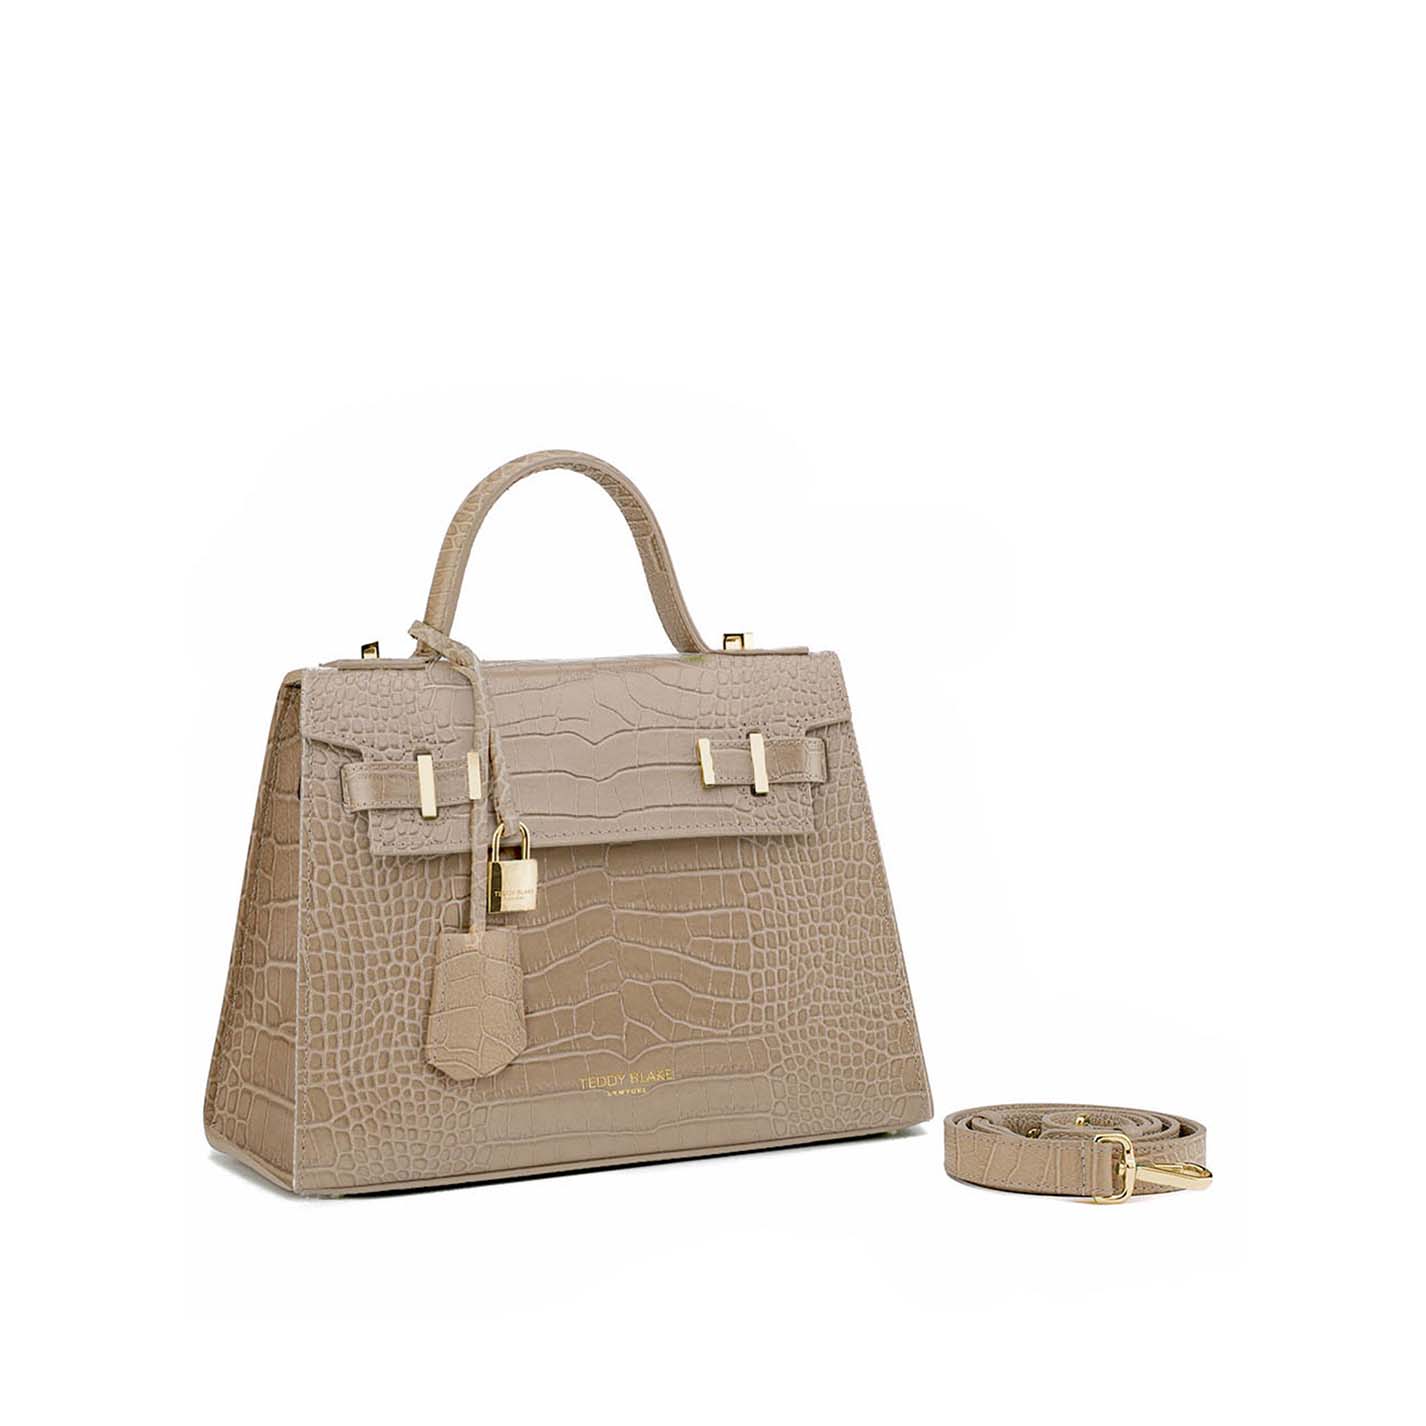 ava-croco-gold-11-light-beige-leather-bag-with-handle